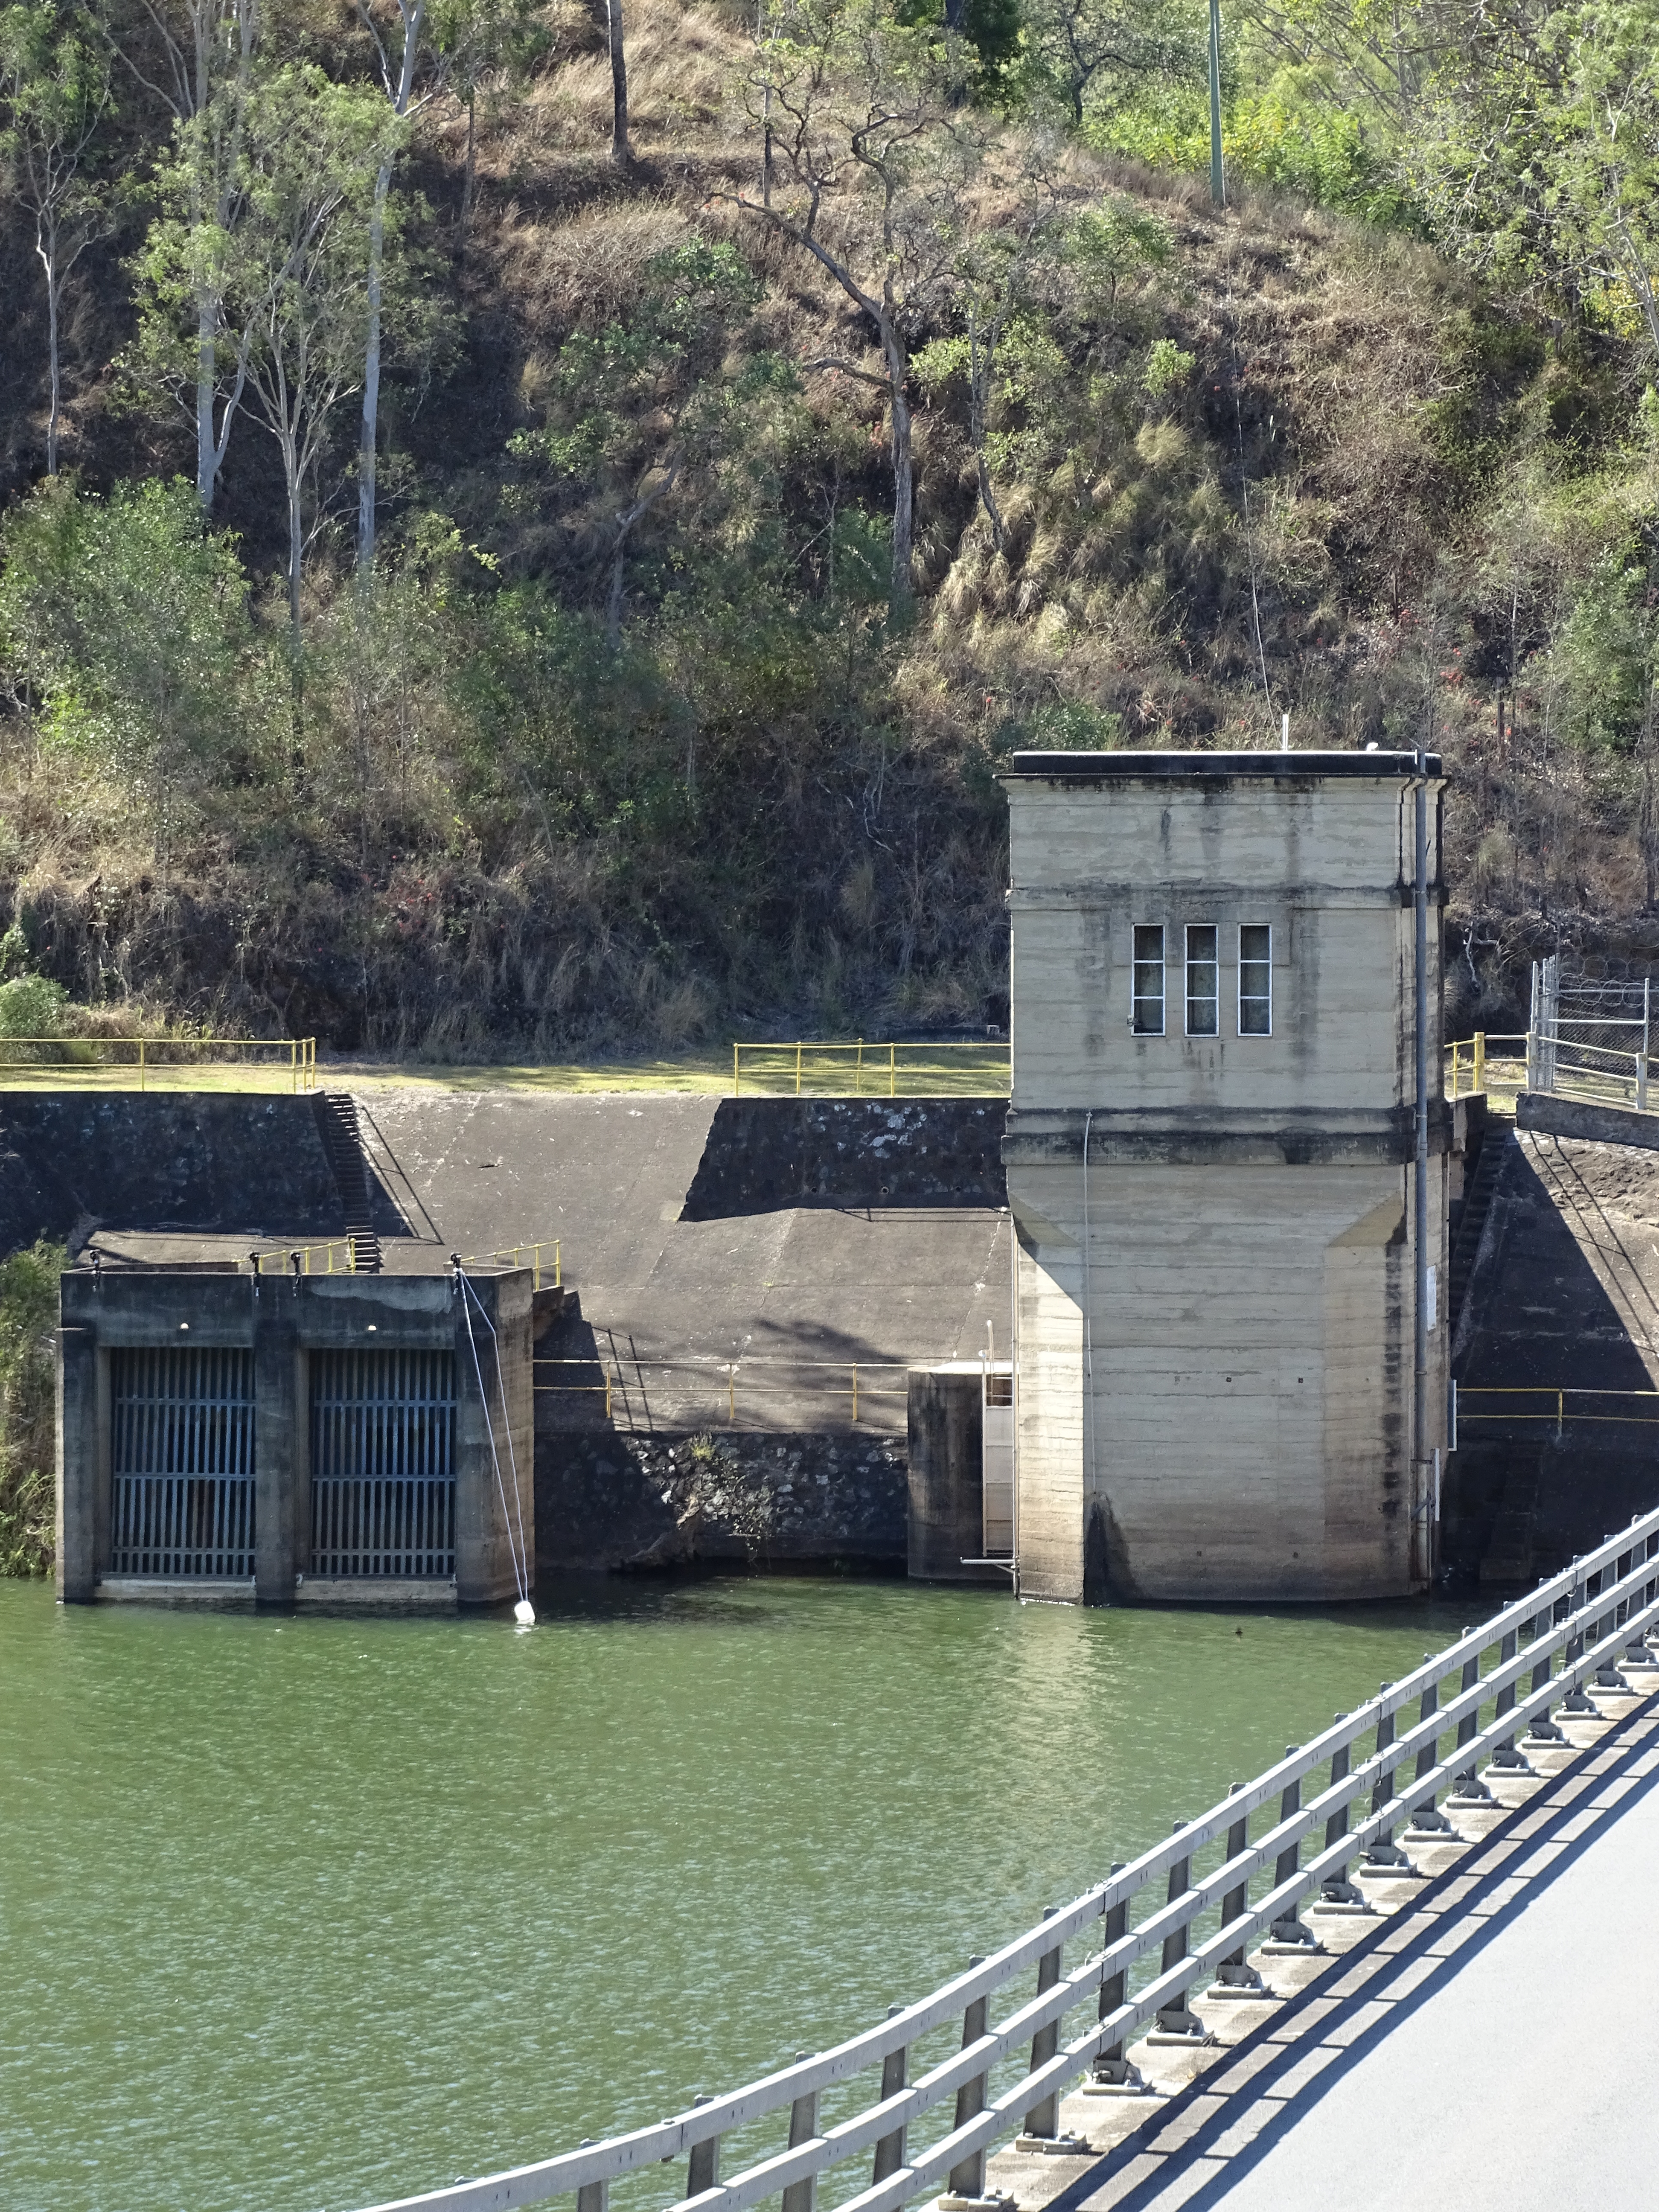 This is an image of the Water Intake Tower as viewed from the Western side of the Mt Crosby Weir, looking east. This is part of the local heritage place known as Mt Crosby Weir & Old Bridge Foundations.